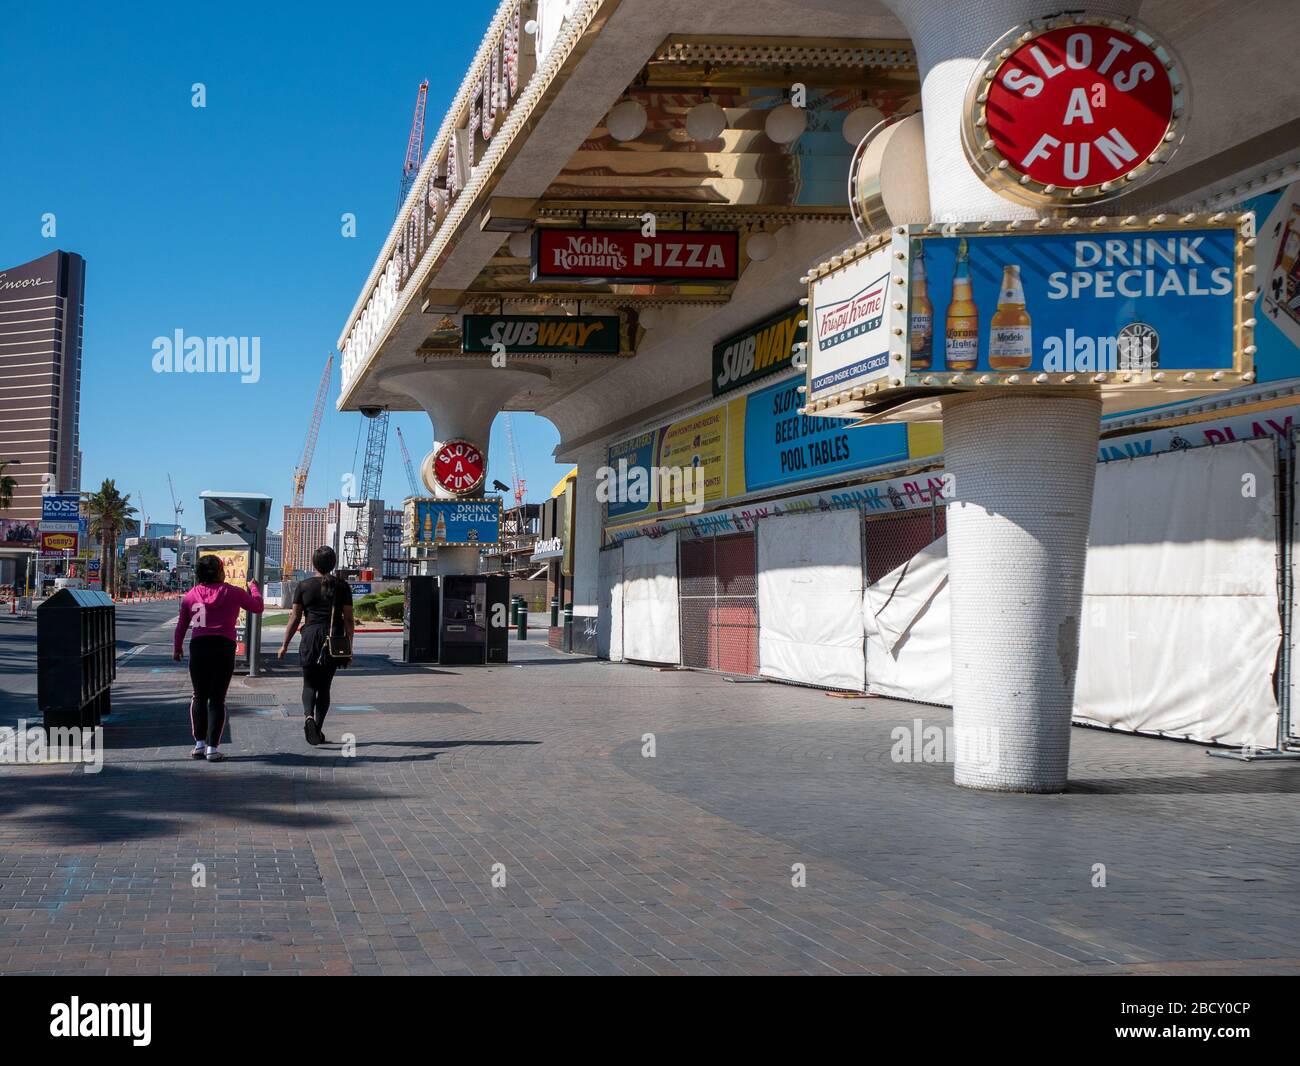 4 April 2020, Las Vegas, Nevada, USA, Two women walking on deserted Las Vegas Boulevard in front of boarded up shops due to Covid-19 shut down Stock Photo